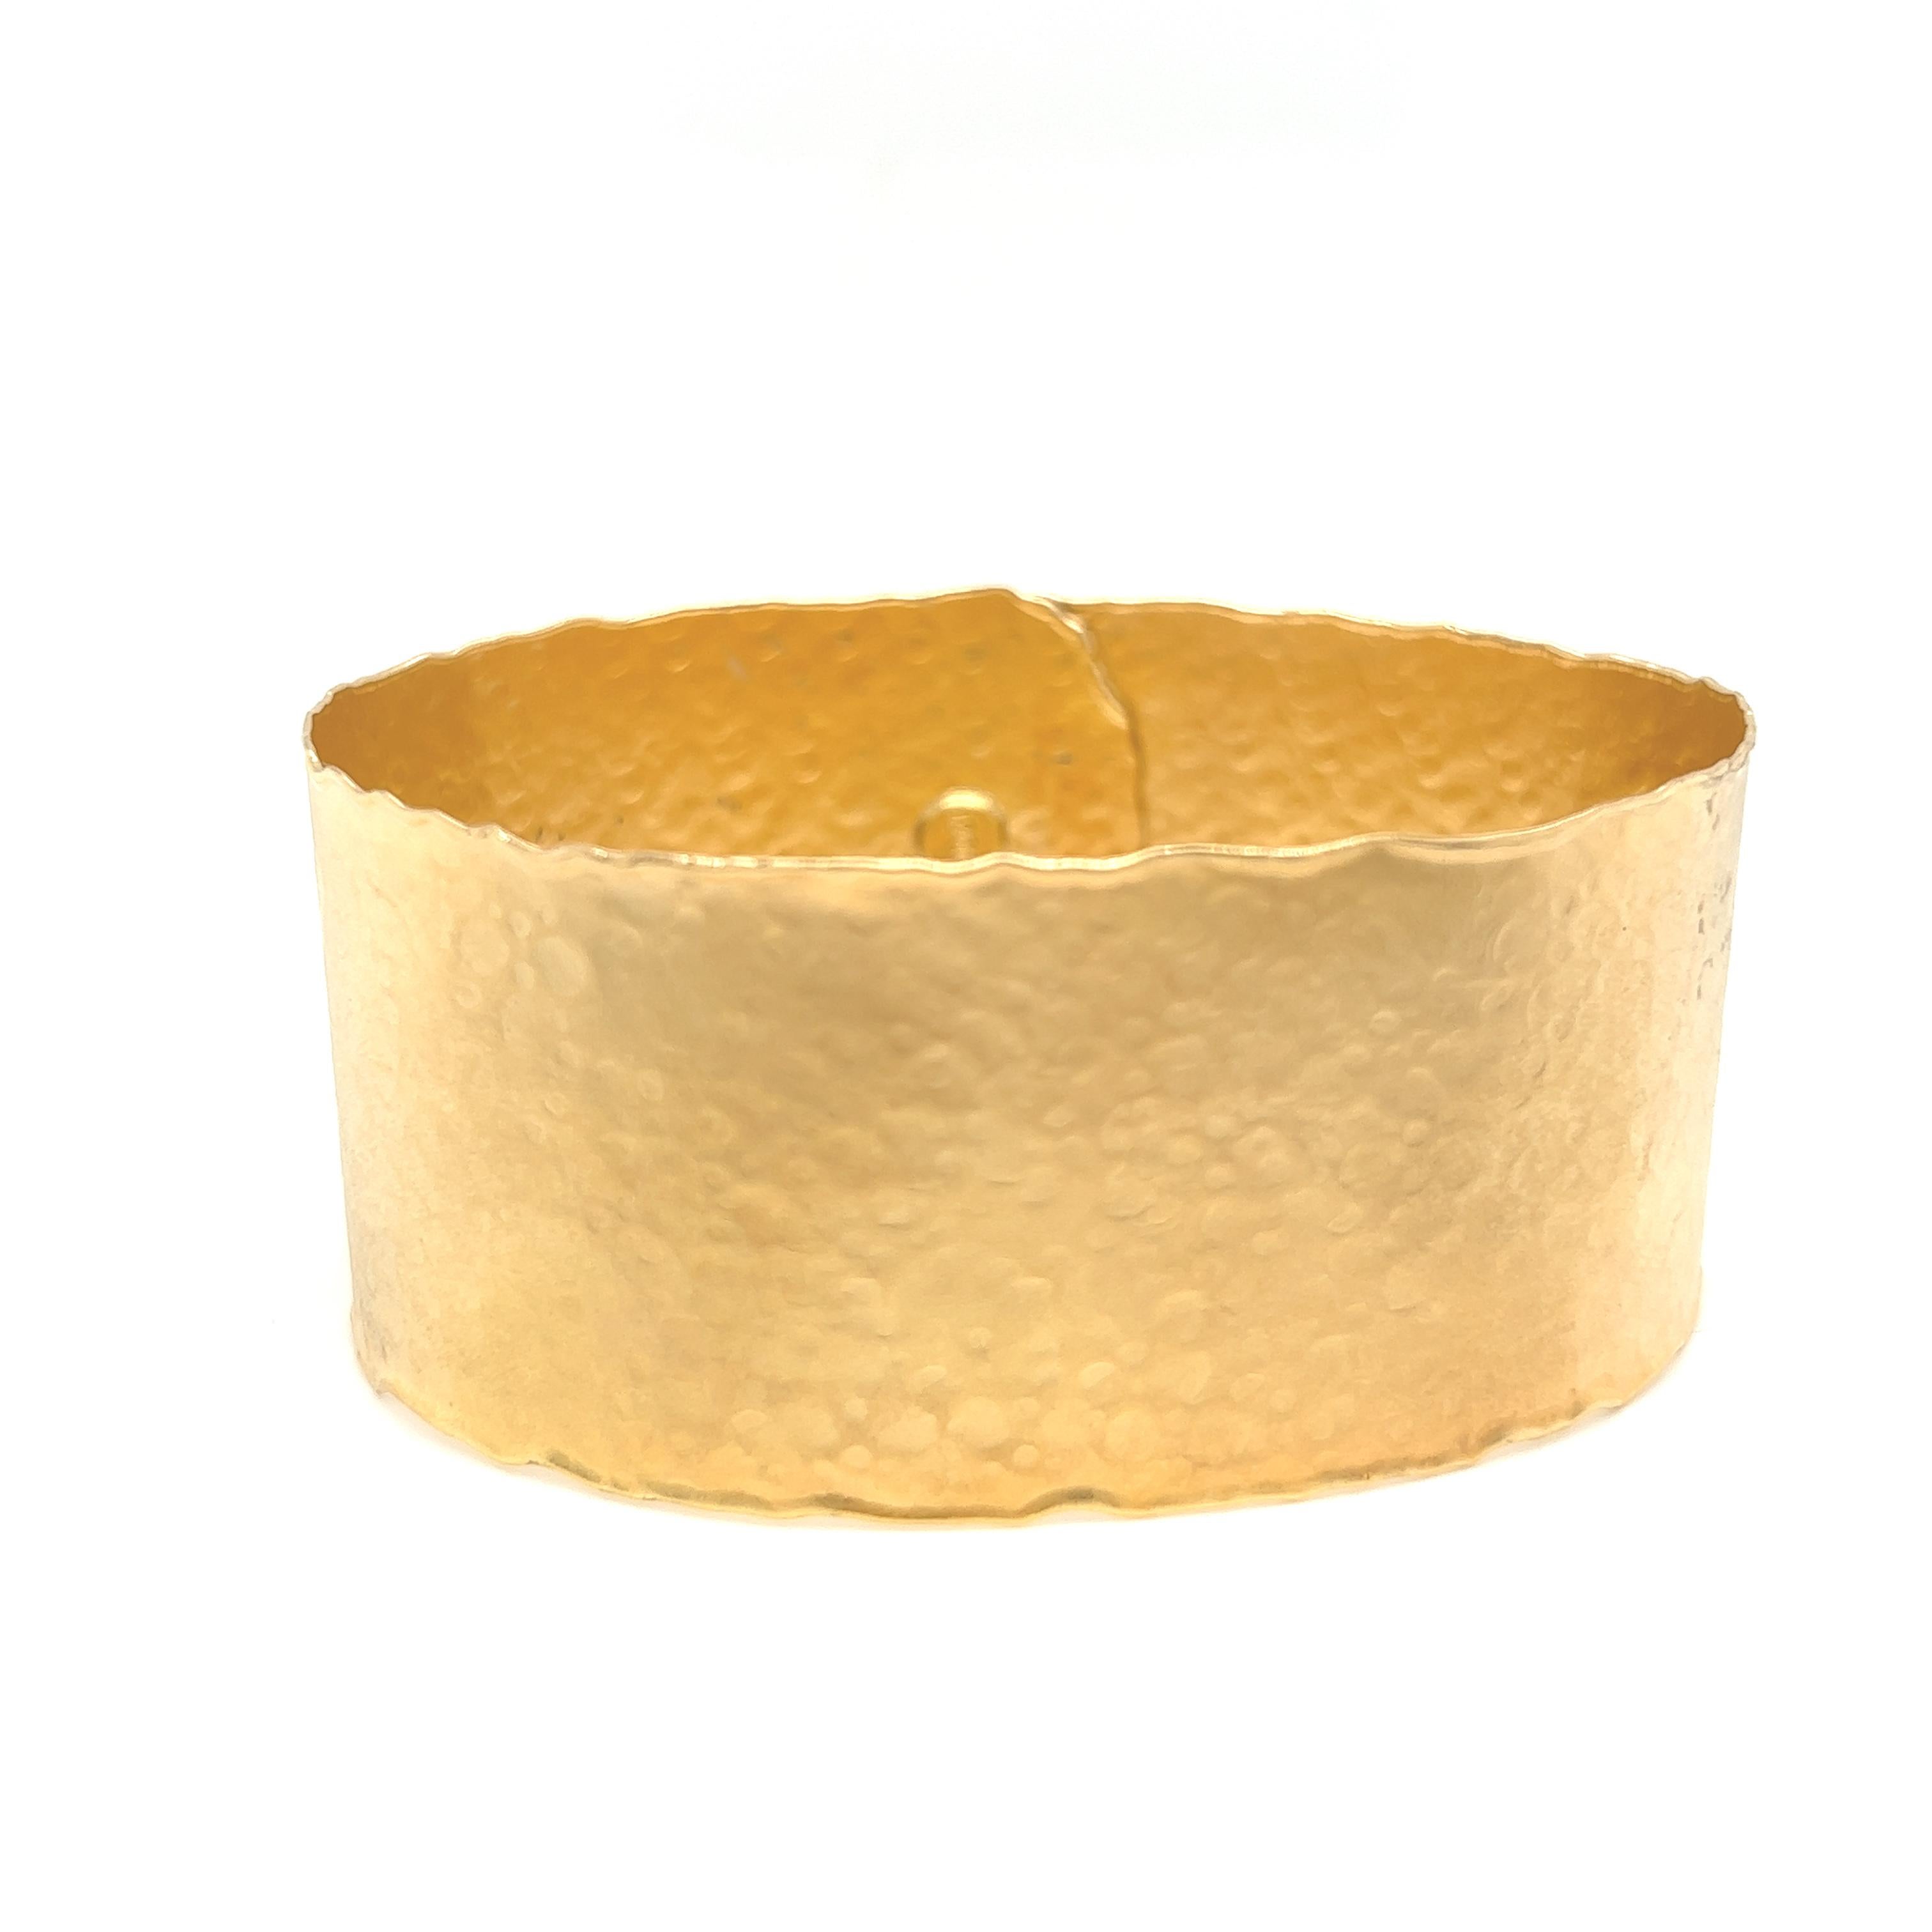 Round Cut Hand-Crafted 14K Yellow Gold Button Cuff Bracelet. For Sale